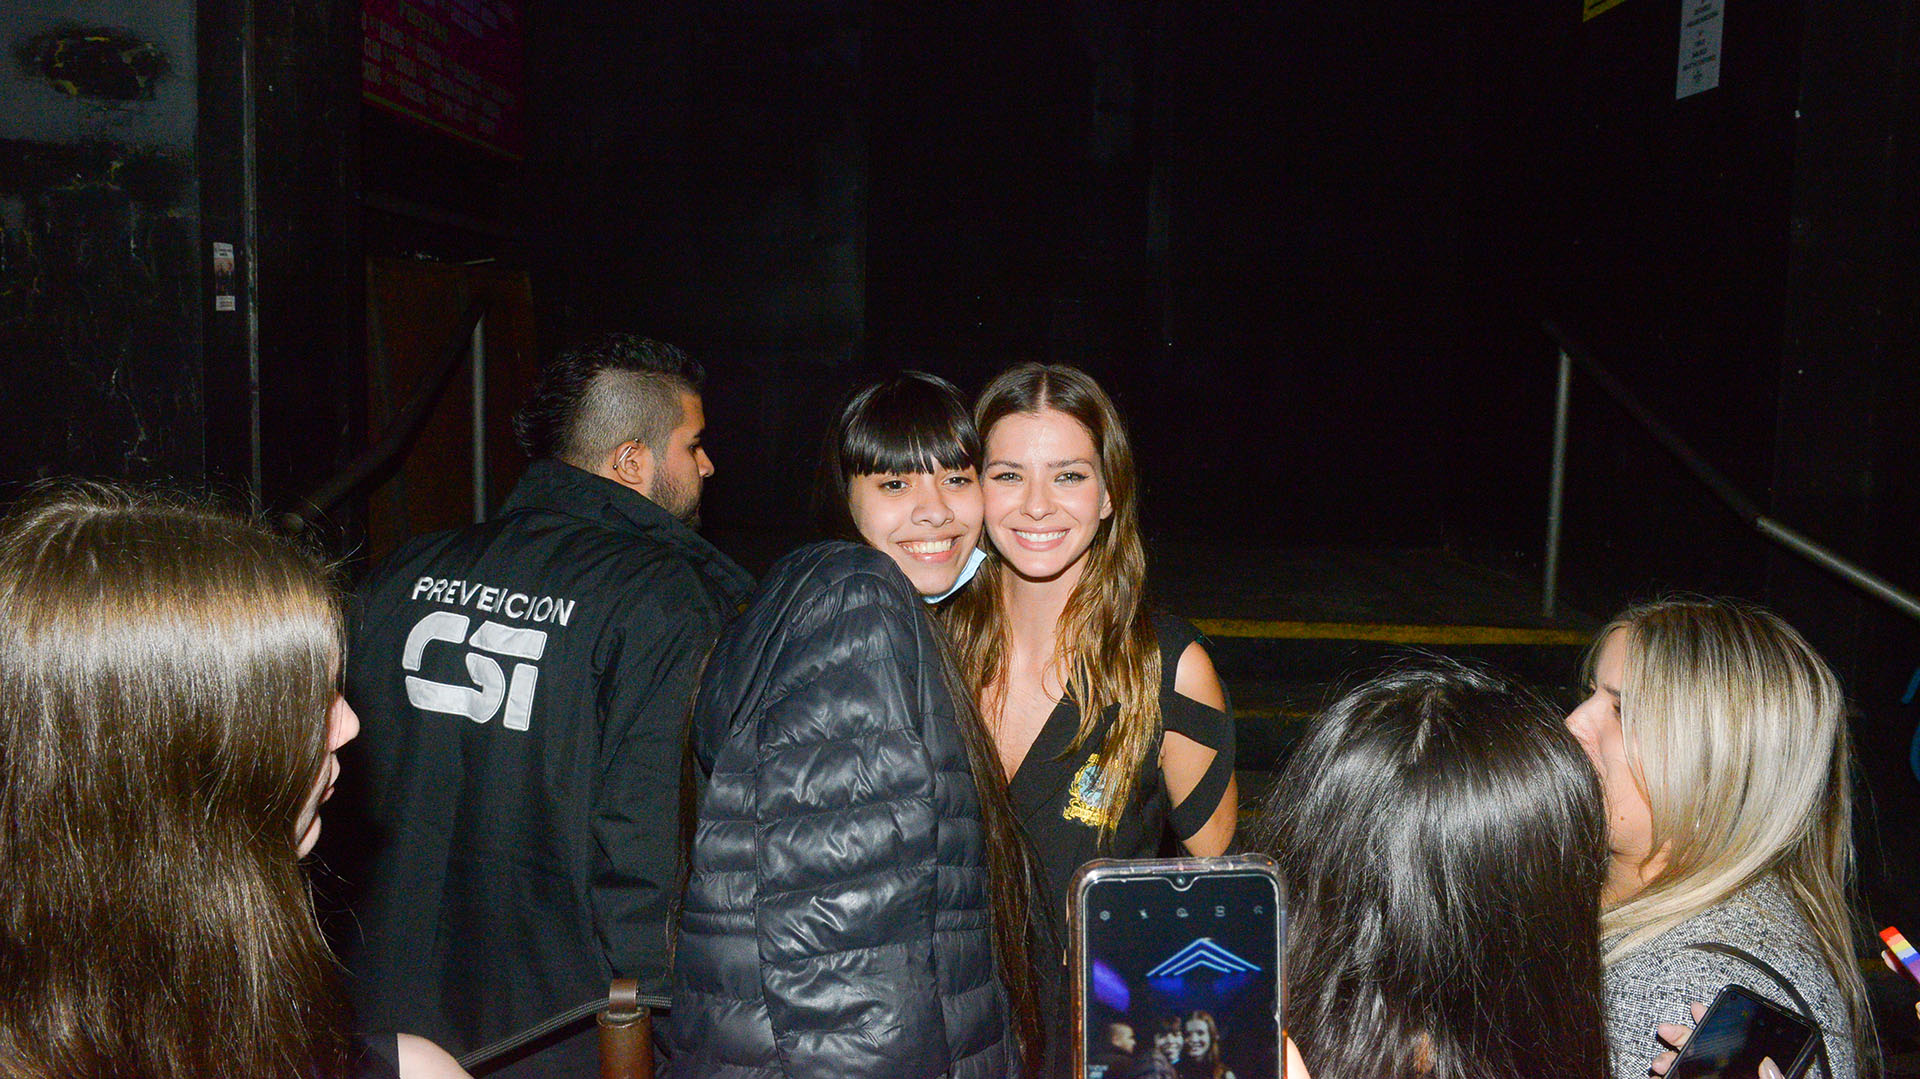 After the show, China Suárez took pictures with the audience